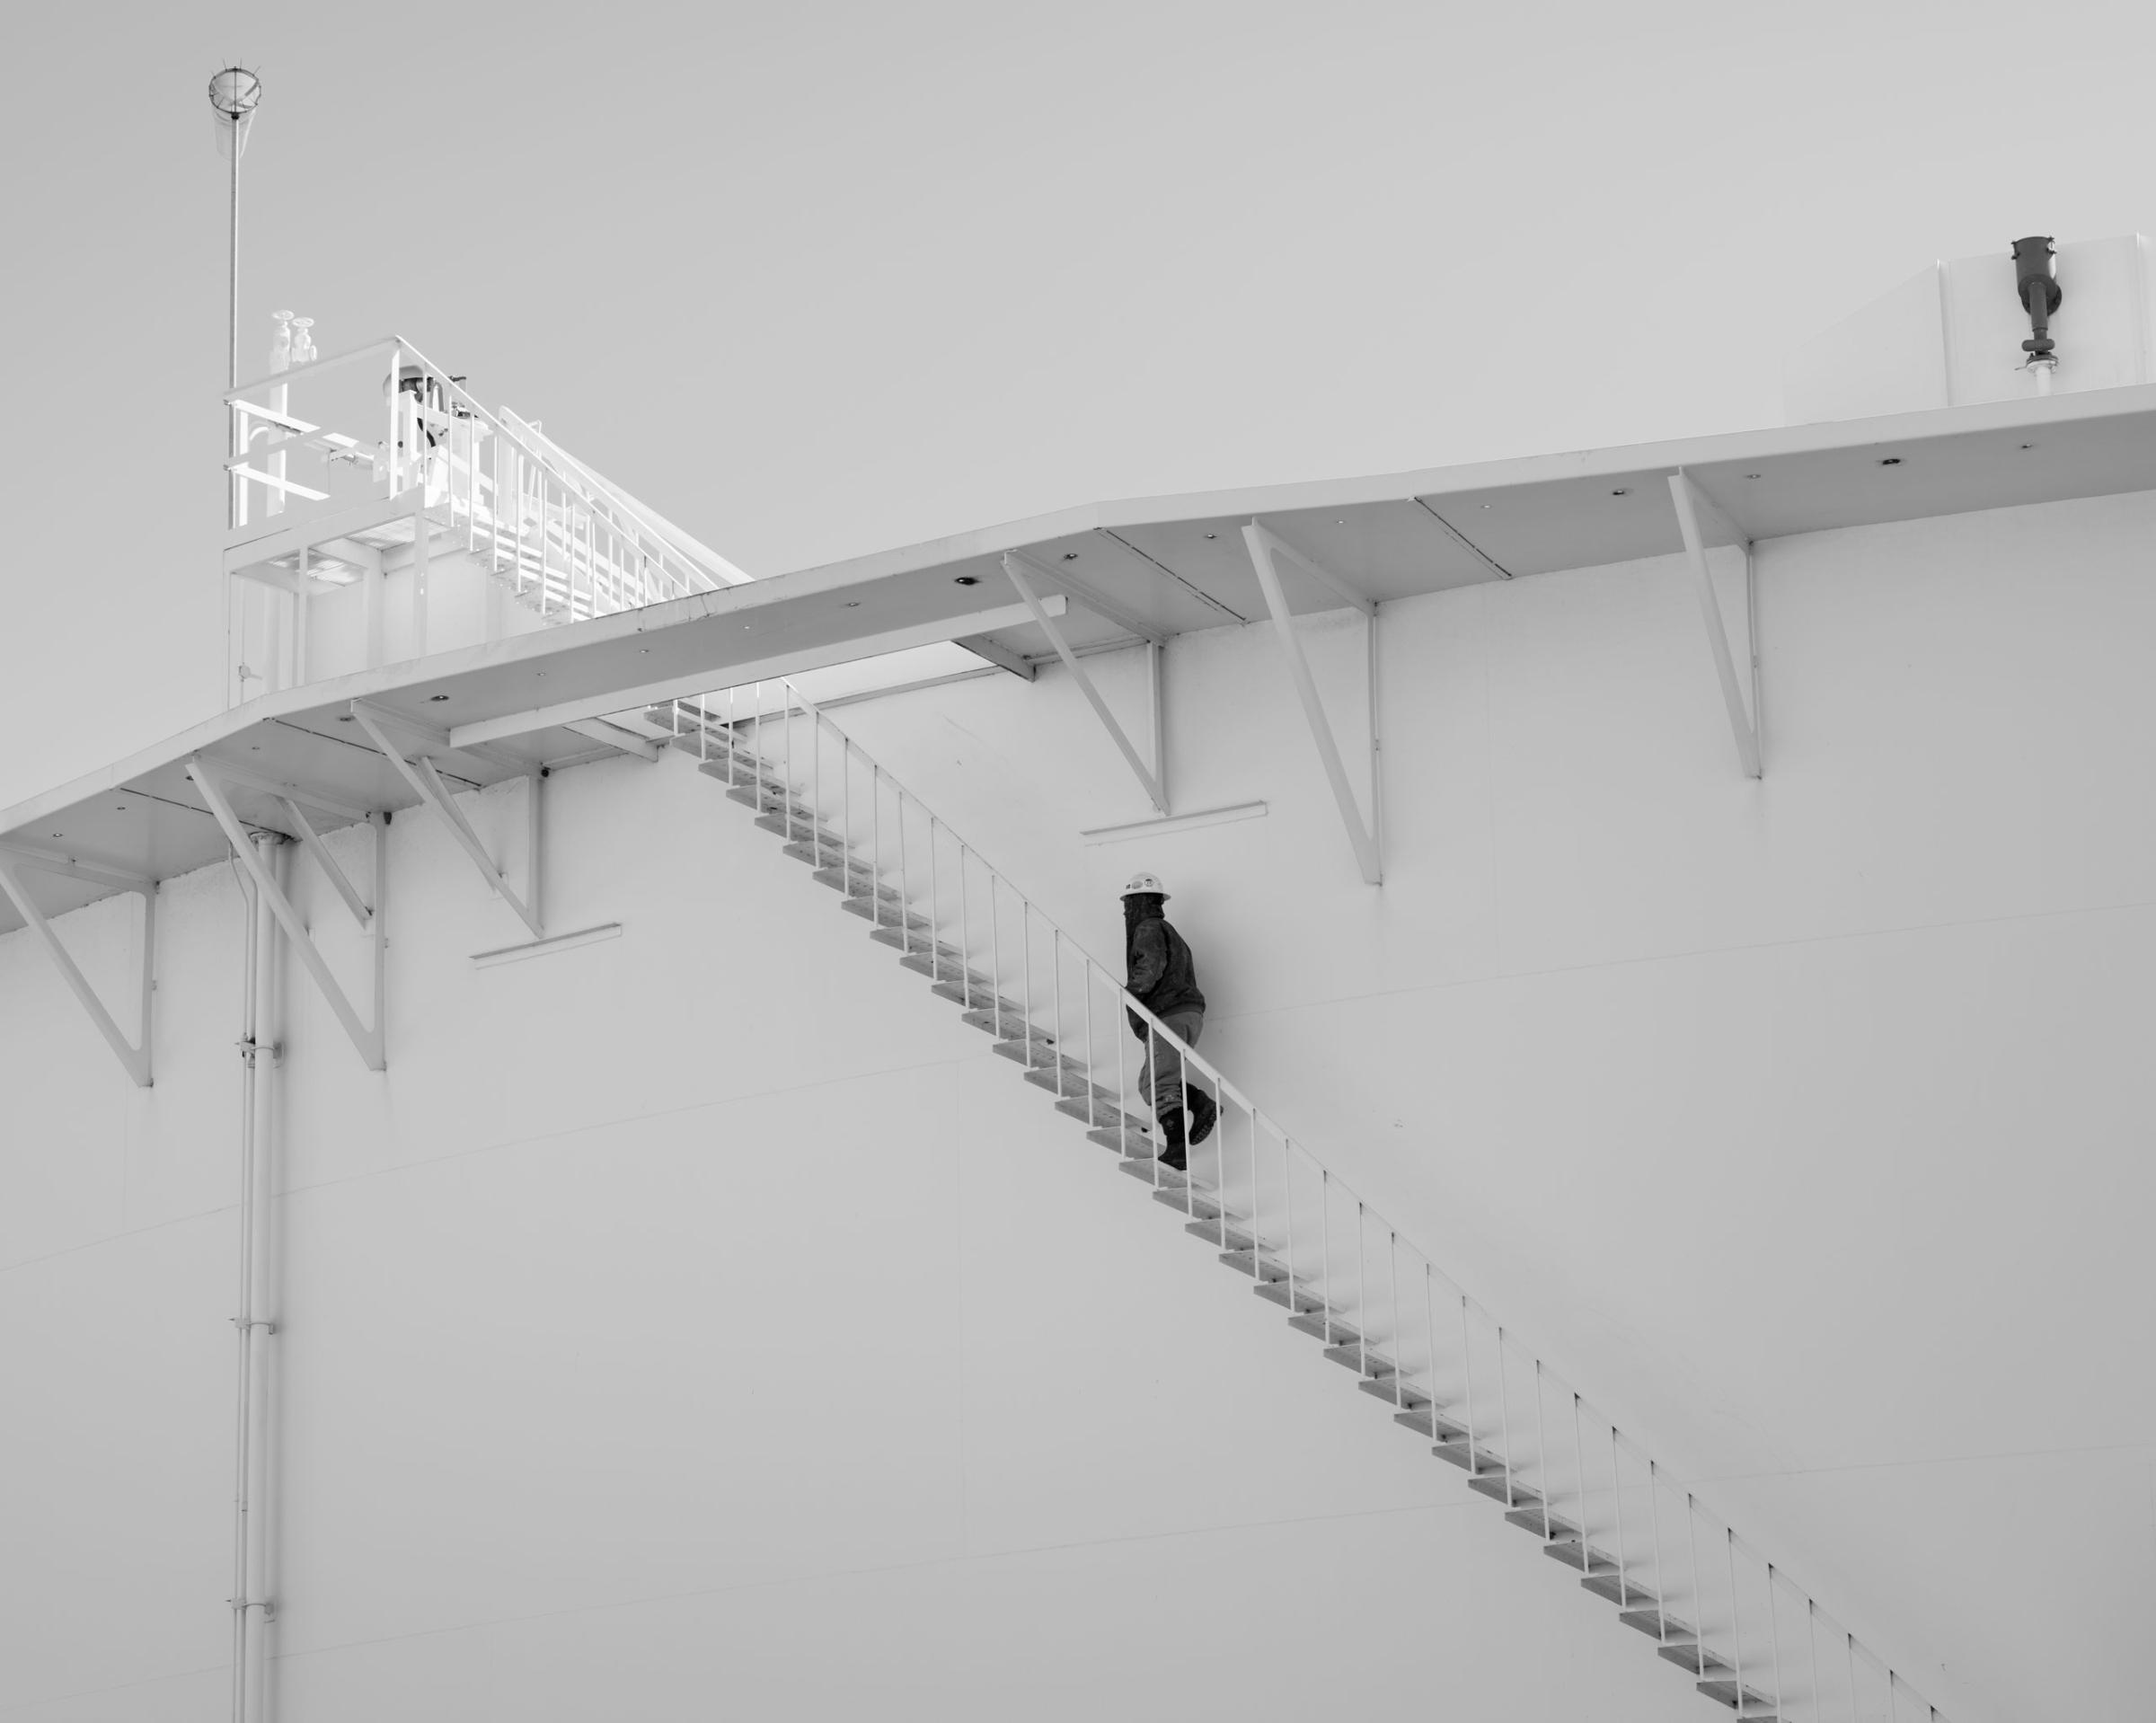 A worker walks up stairs on an oil storage tank, Cushing, Oklahoma. Cushing is a vital transshipment point with many intersecting pipelines, storage facilities and easy access to refiners and suppliers. Crude oil flows inbound to Cushing from all directions and outbound through dozens of pipelines. It is one of the largest oil reserves in the world.